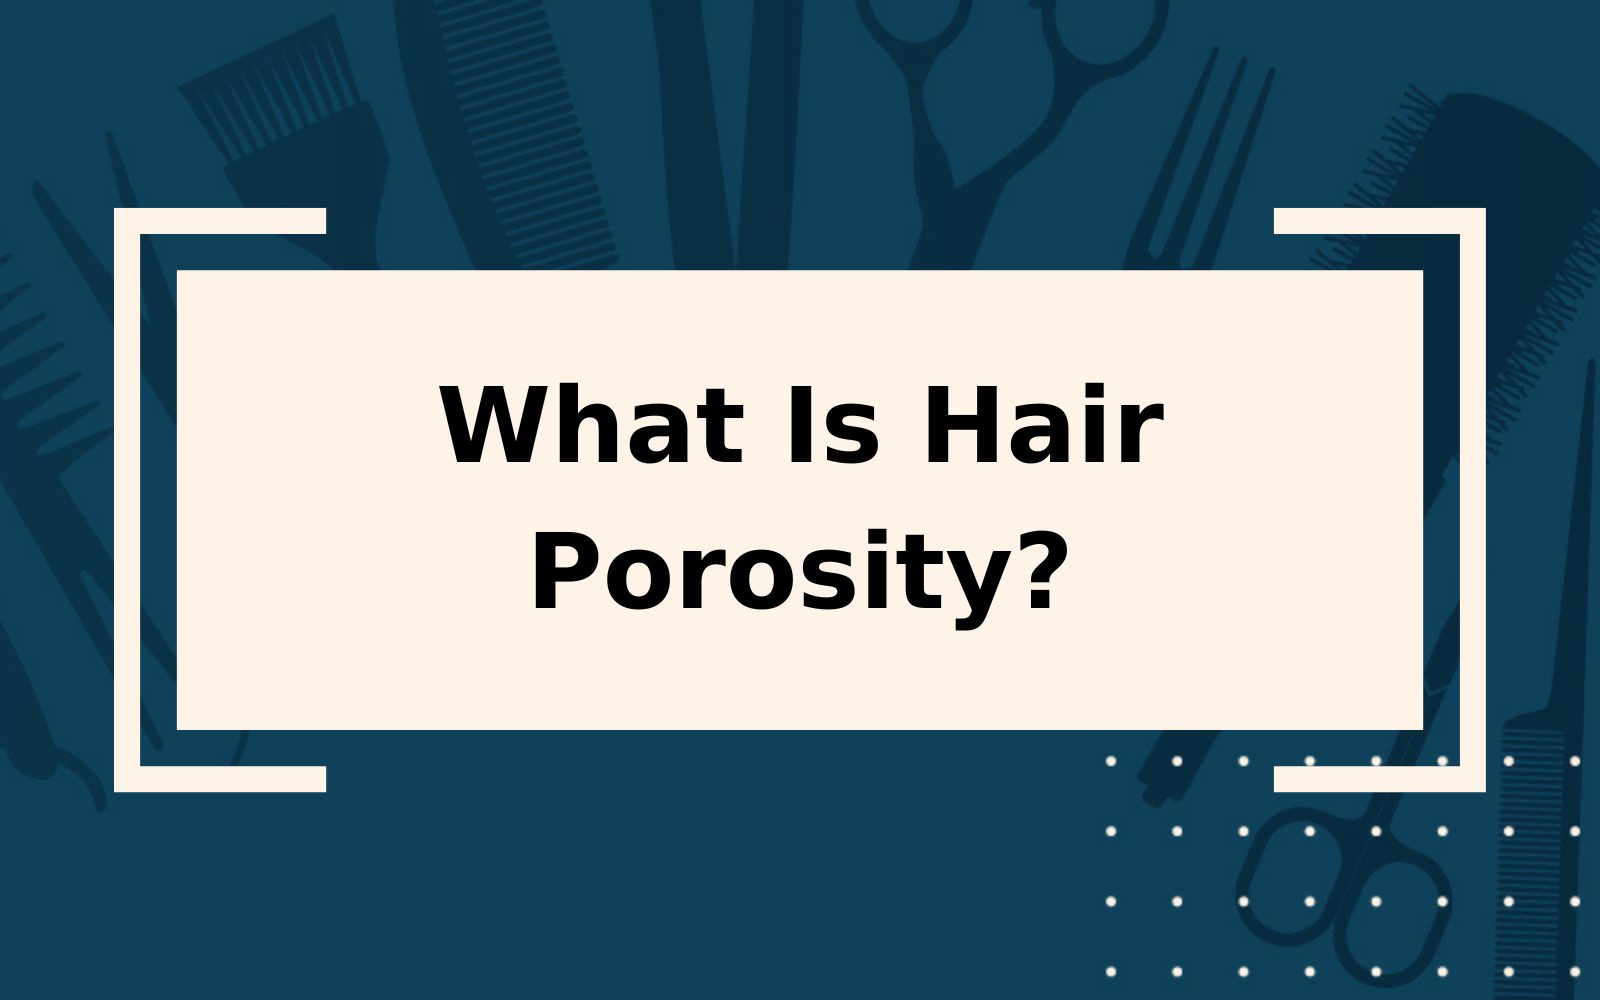 What Is Hair Porosity? | And Why Does It Matter?